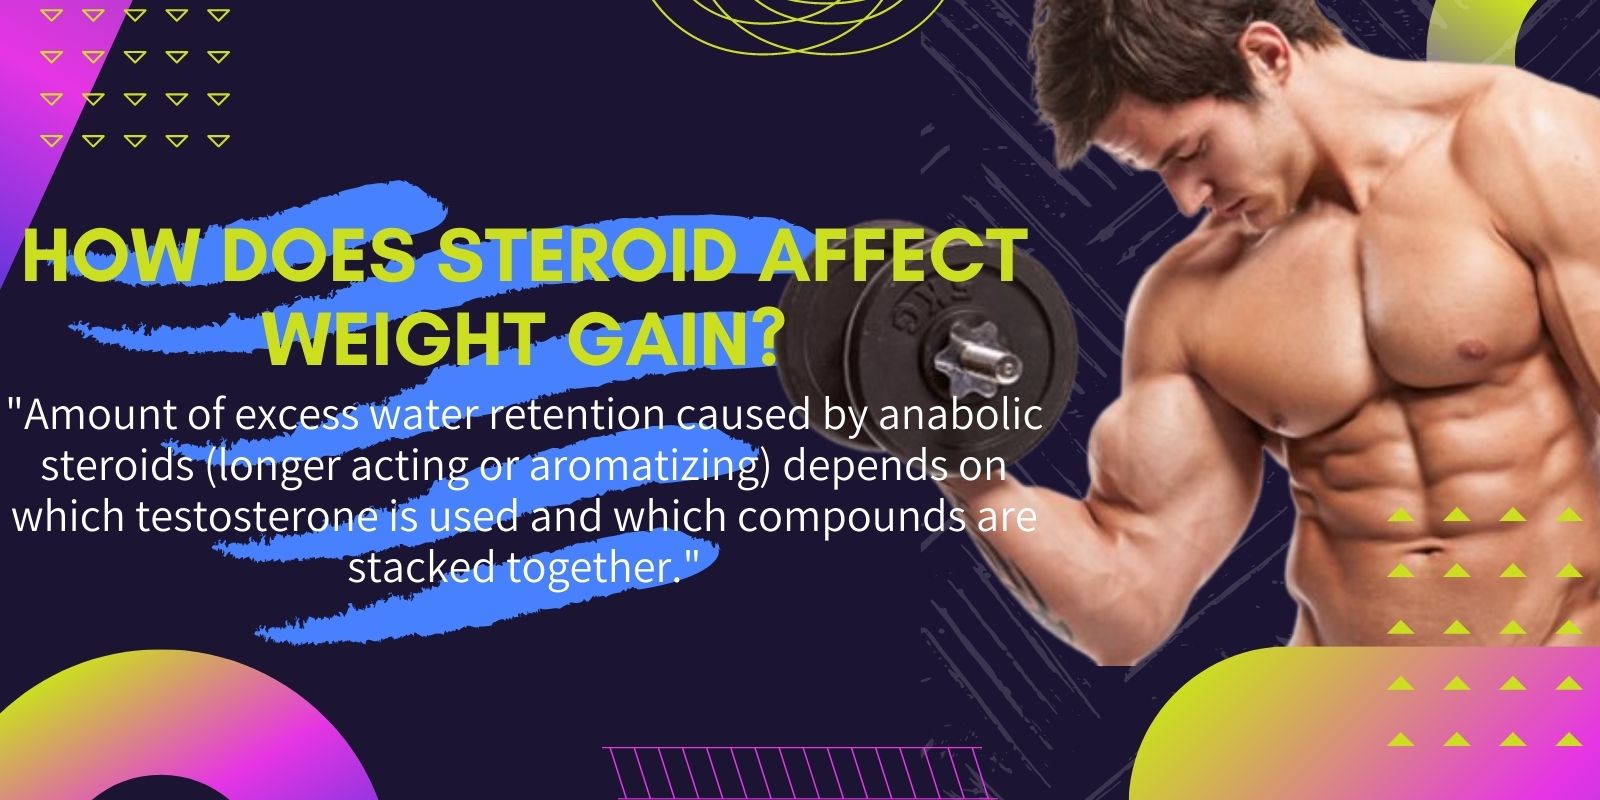 How Does Steroid Affect Weight Gain?